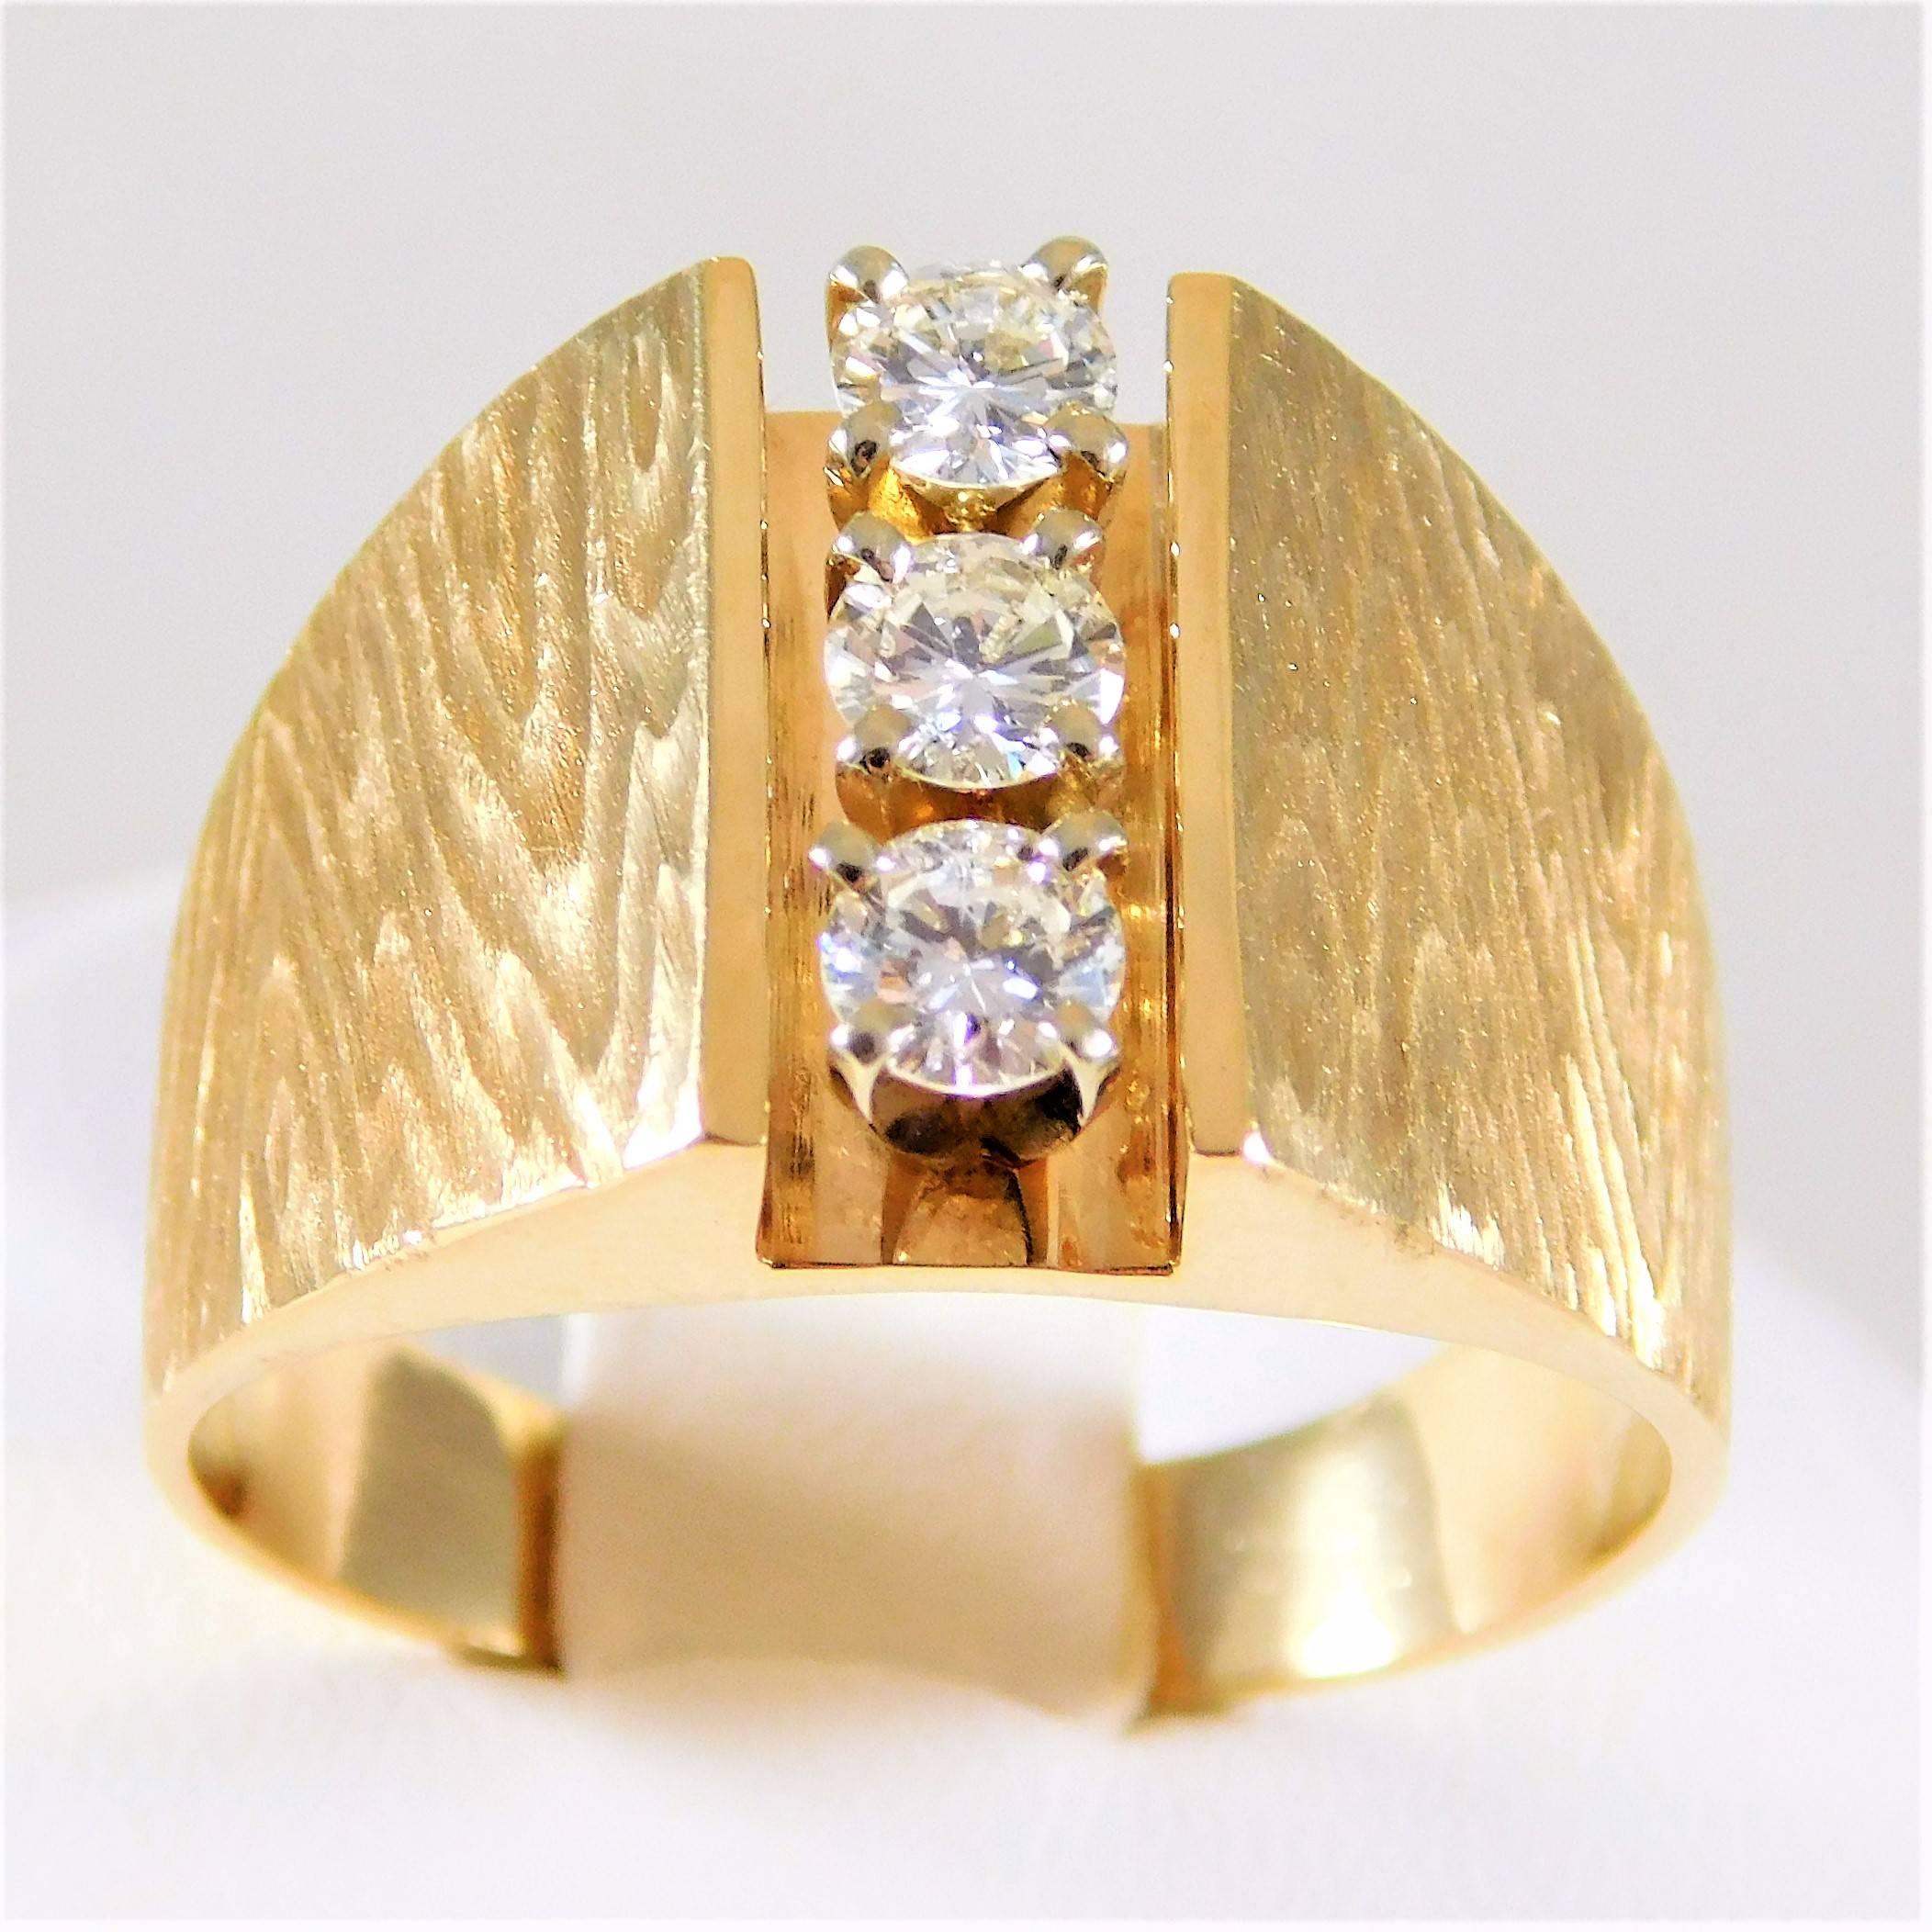 Gents Vintage 14k Gold and Diamond Ring with Damascus Finish
 
Circa 1980-1990.  From a noble New Orleans estate.  This majestic ring has been crafted in solid 14k yellow gold.  The gold finish on this piece is an extremely unique Damascus